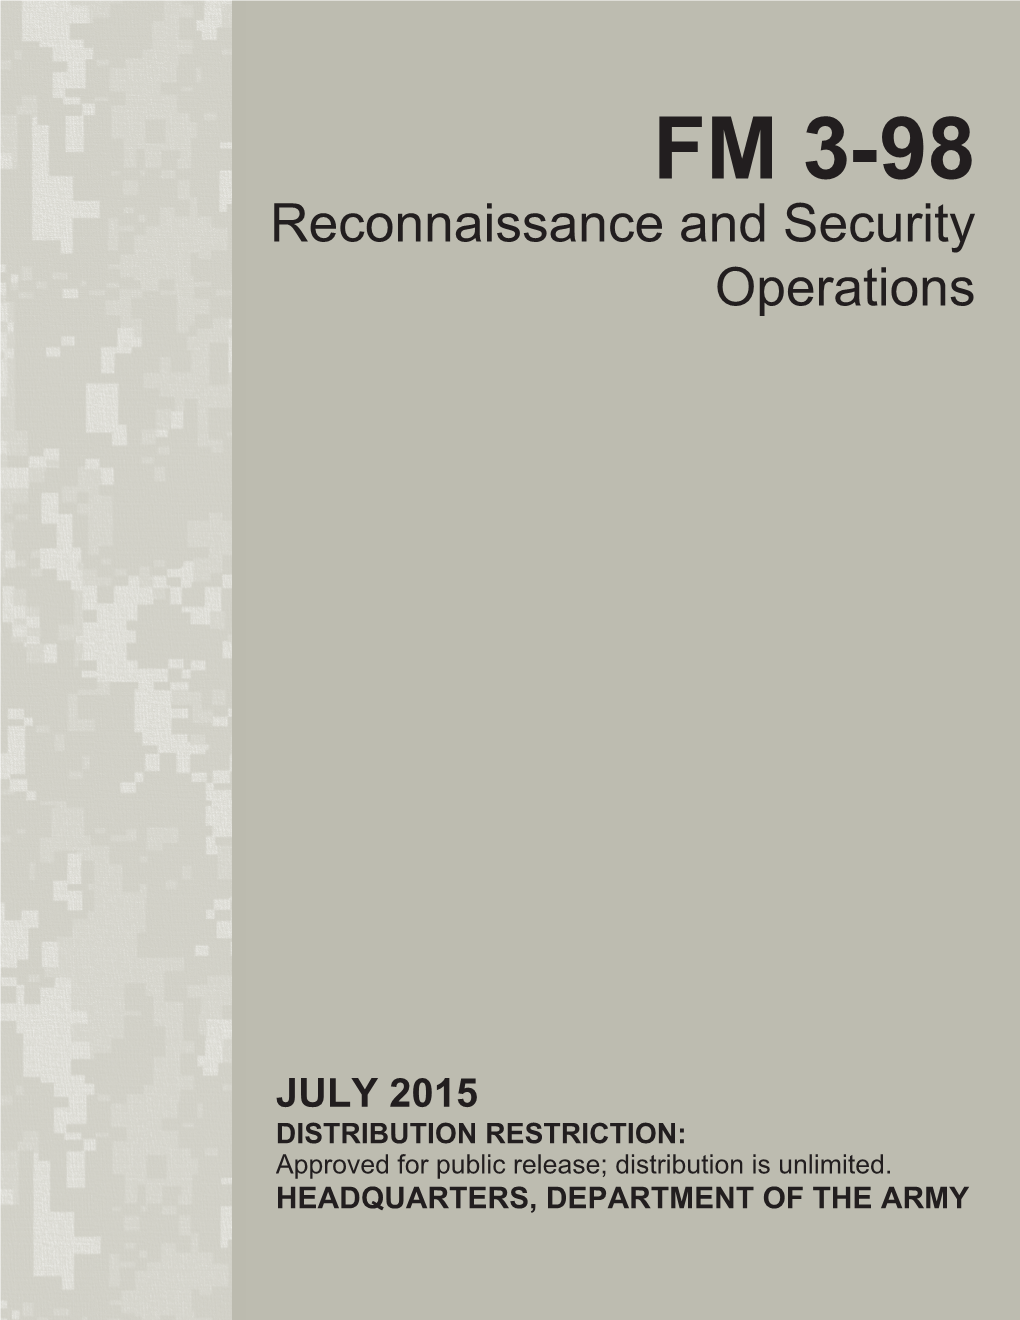 FM 3-98. Reconnaissance and Security Operations